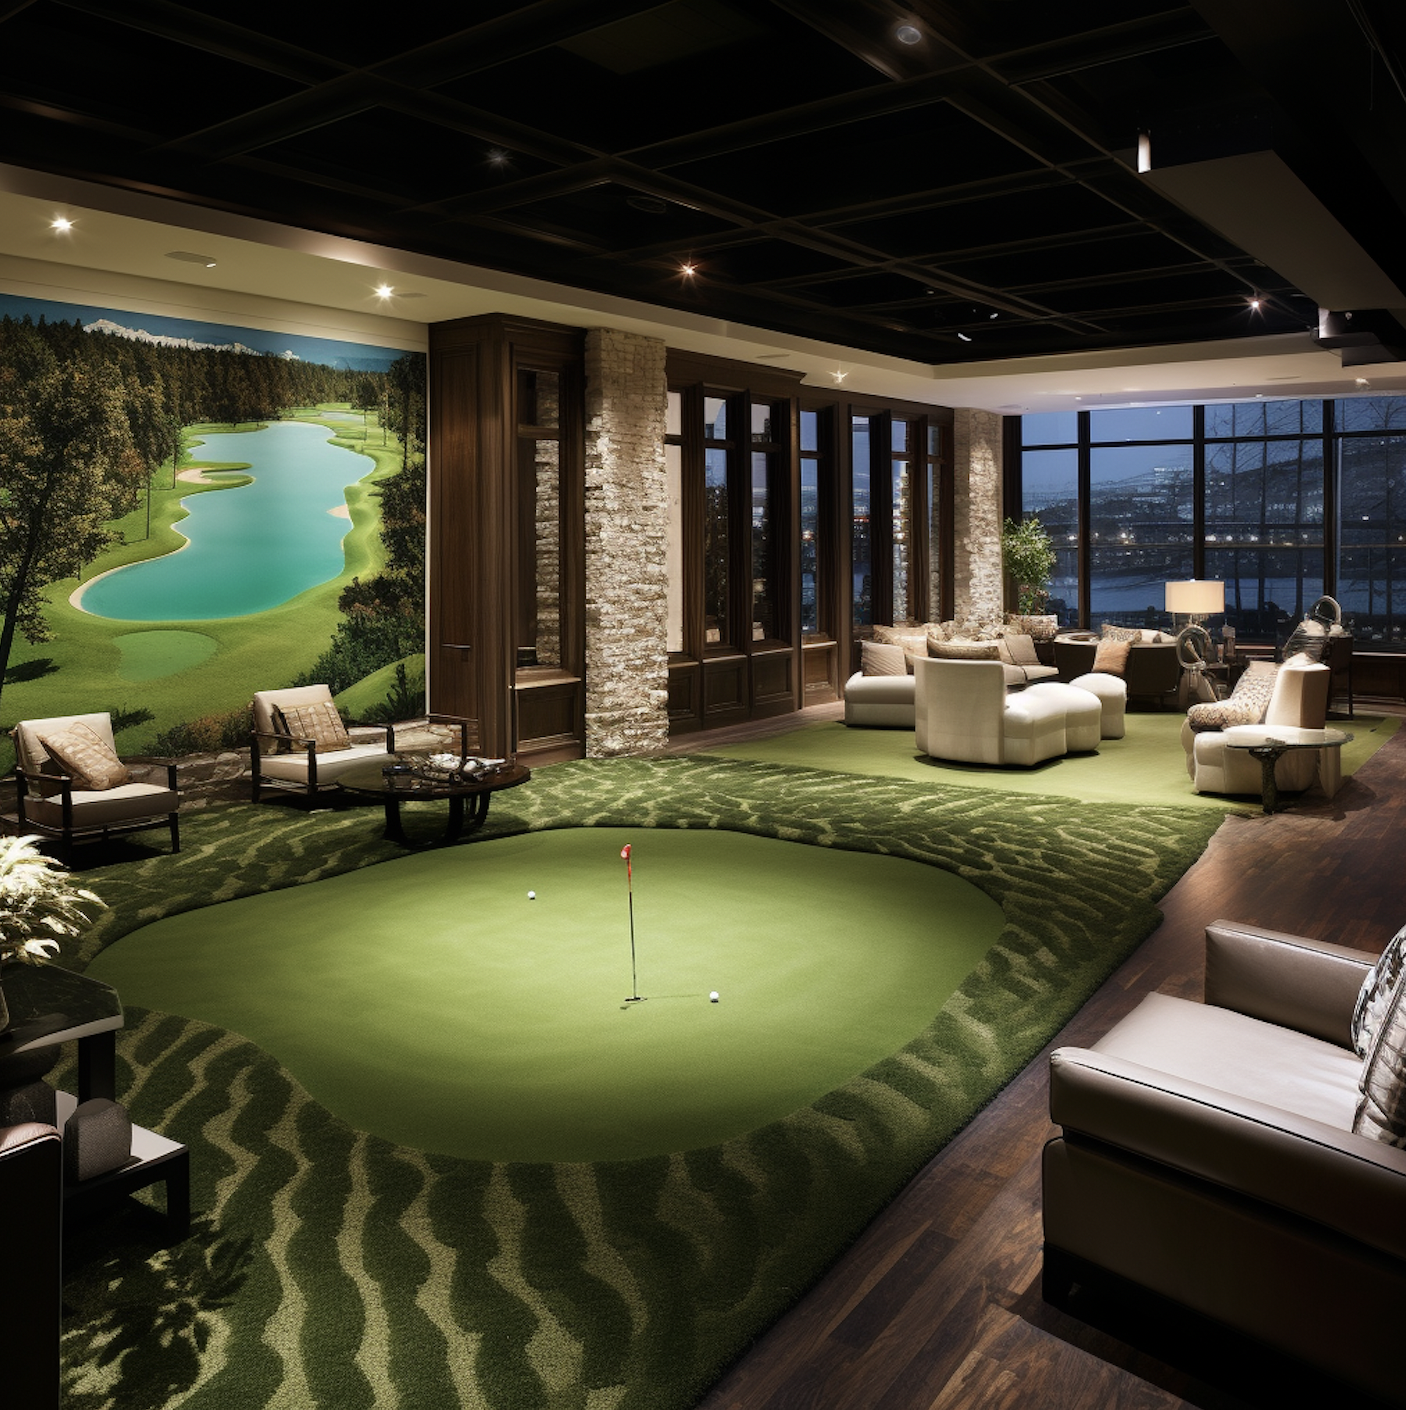 A putting green turf simulator in a large room with lounge chairs.